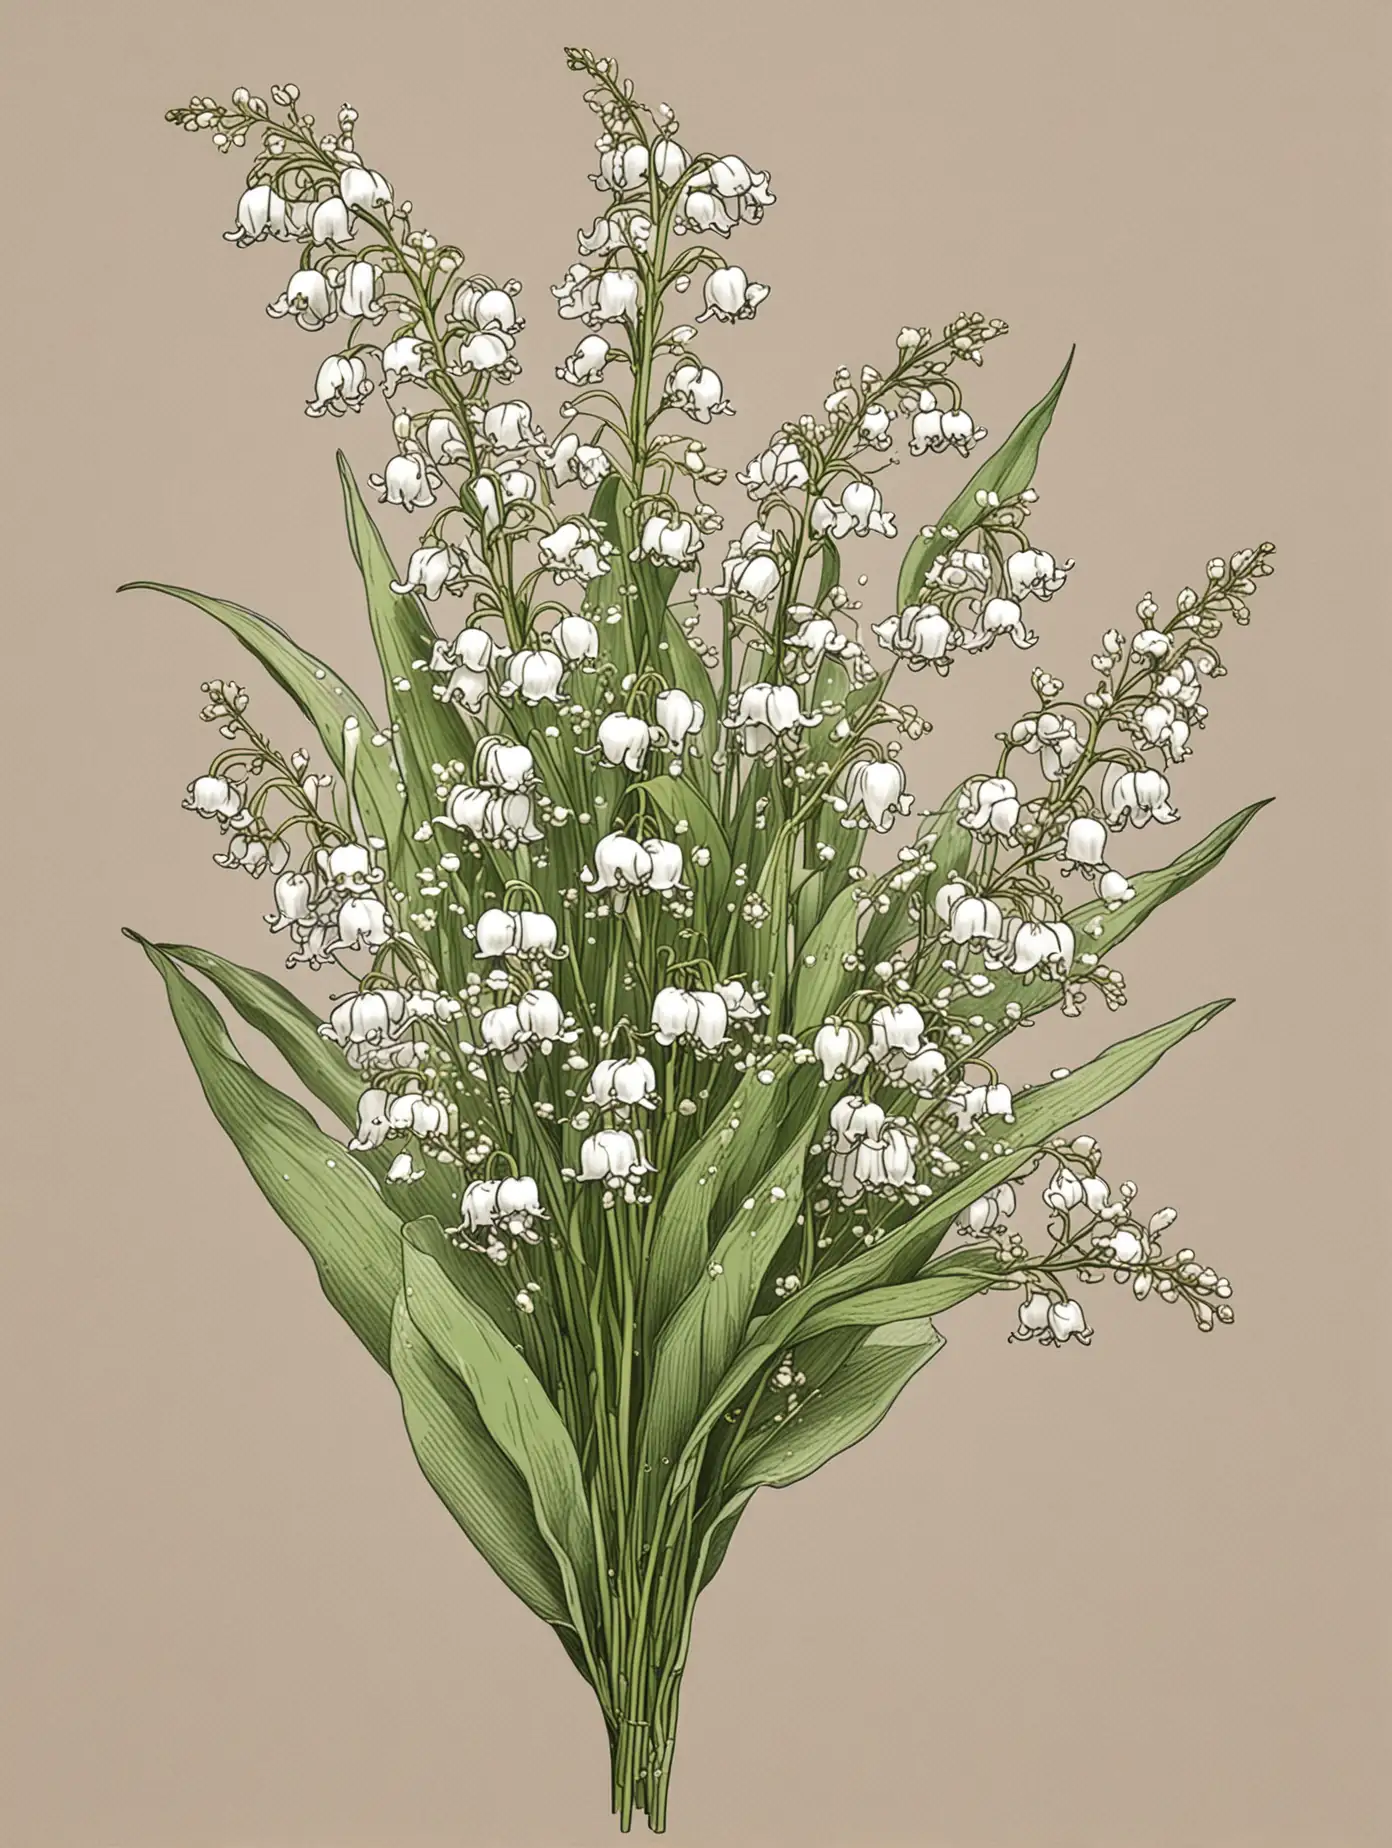 Audubon Style Drawing of Lily of the Valley Flowers